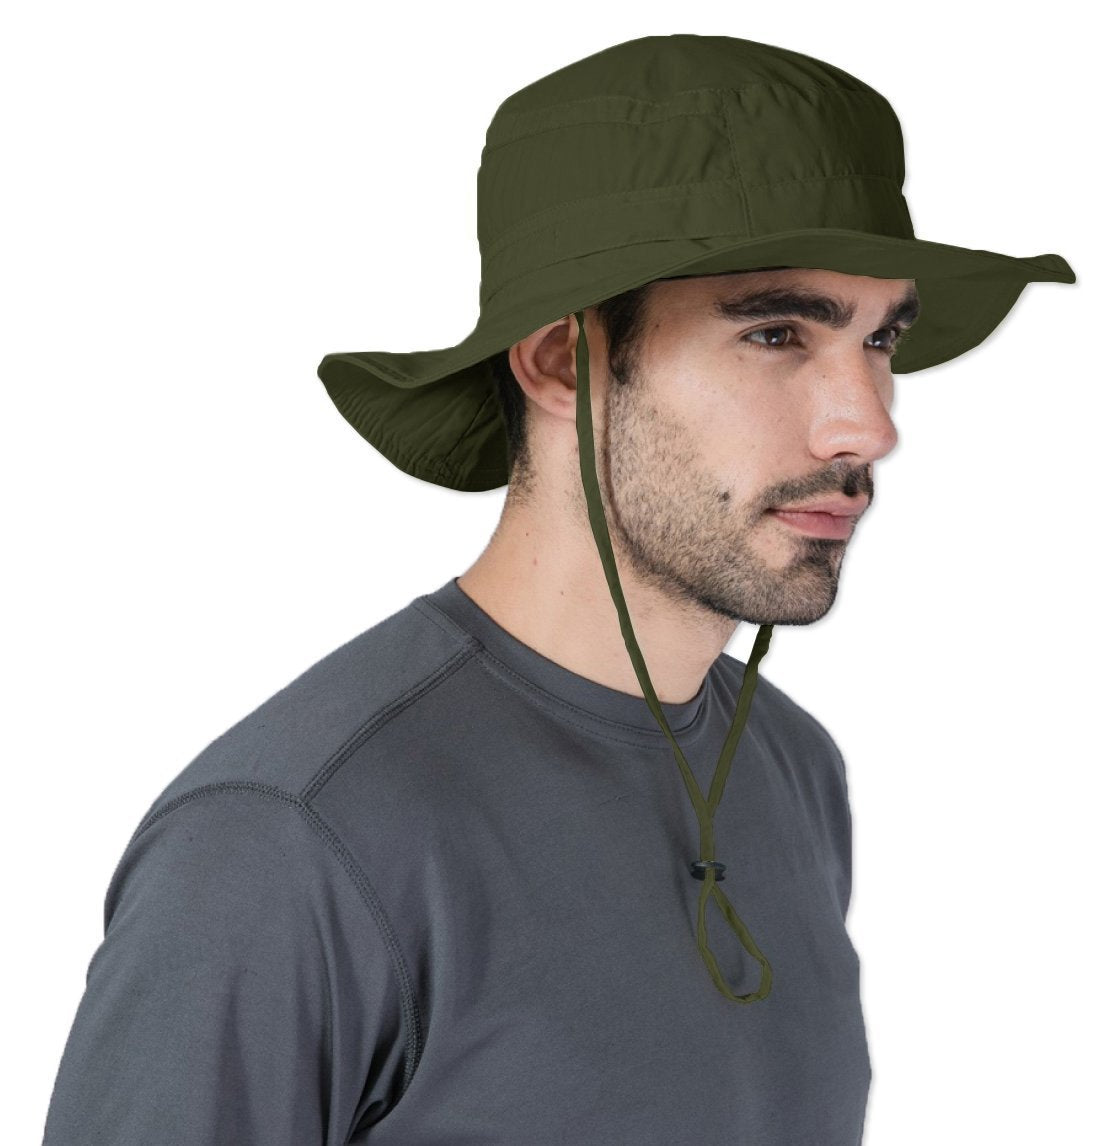 Sun Proof Denim Bucket Hat For Outdoor Activities Stylish Sunshade And  Protective Beanie For Men And Women From Xrh2, $12.56